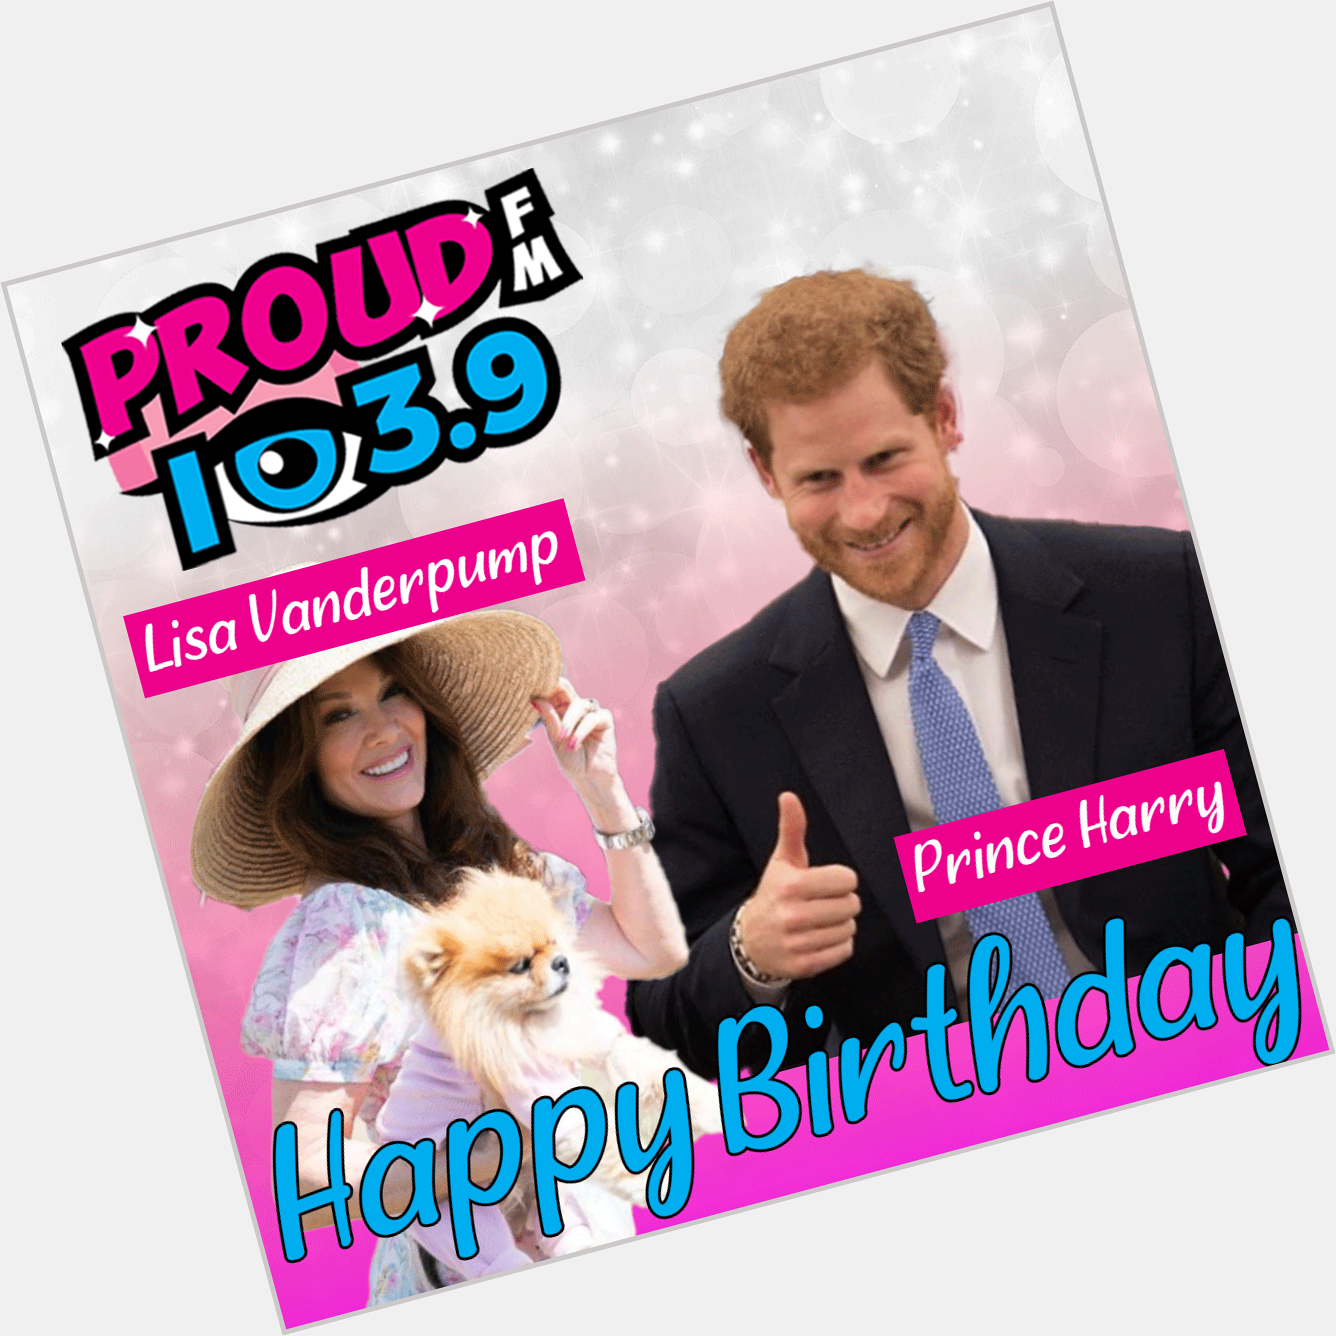 HAPPY BIRTHDAY TODAY TO- Reality Star 
Lisa Vanderpump & Prince Harry!  Have an awesome day!   